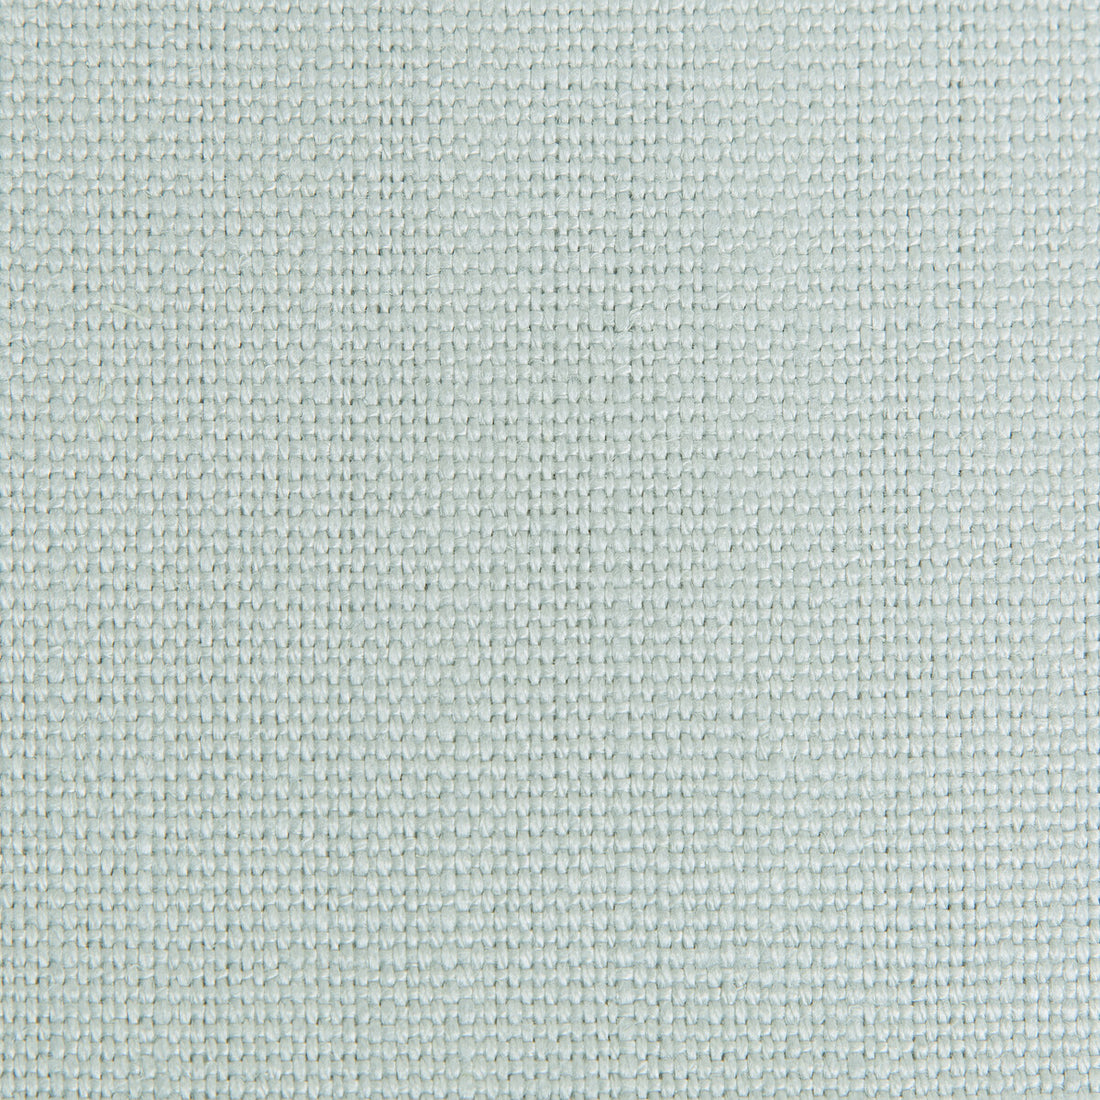 Kravet Couture fabric in 34813-1501 color - pattern 34813.1501.0 - by Kravet Couture in the Mabley Handler collection